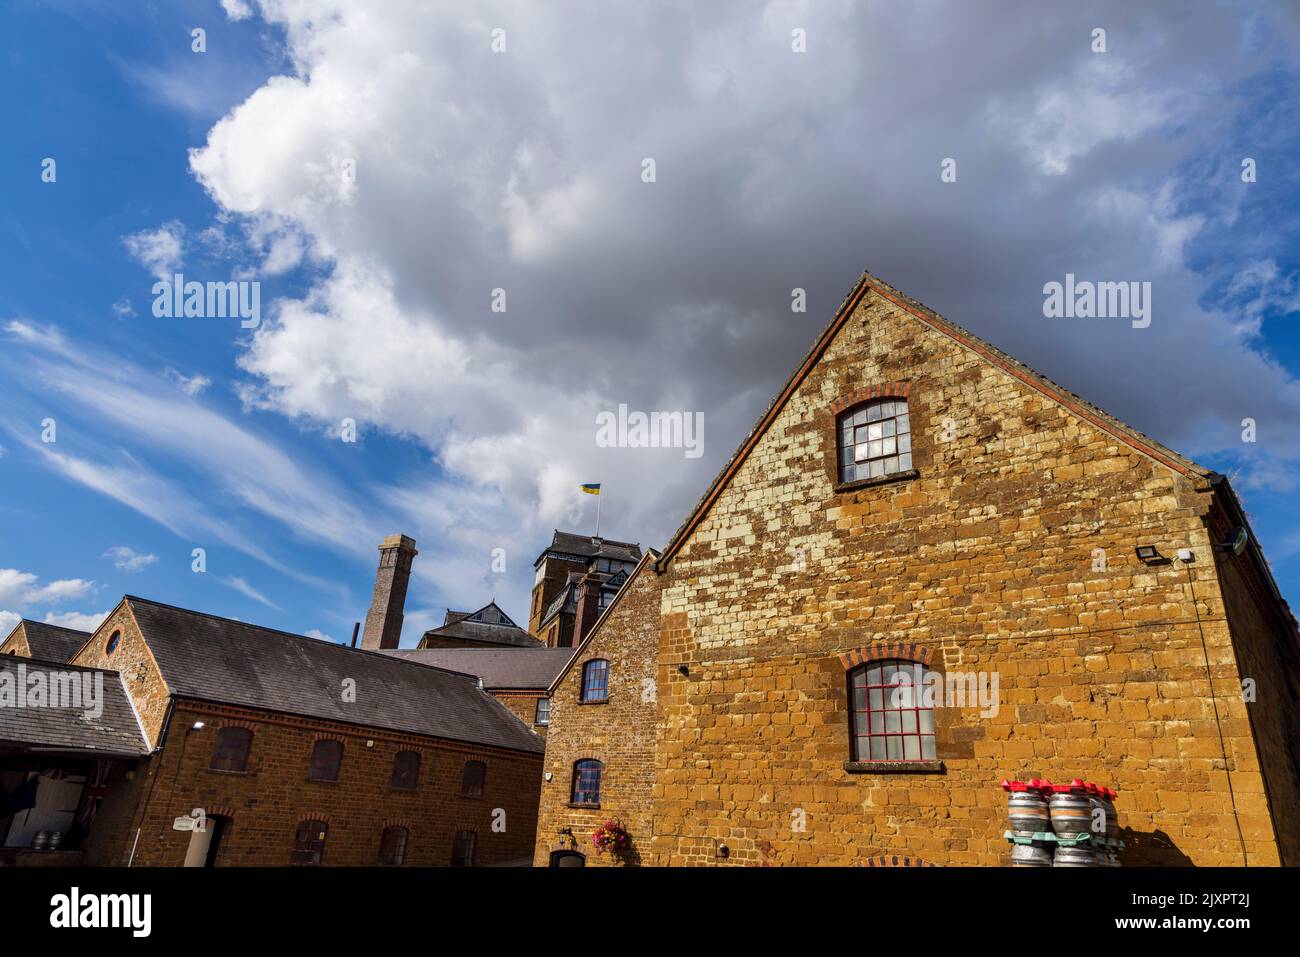 The Victorian Hook Norton Brewery buildings, Oxfordshire, England Stock Photo